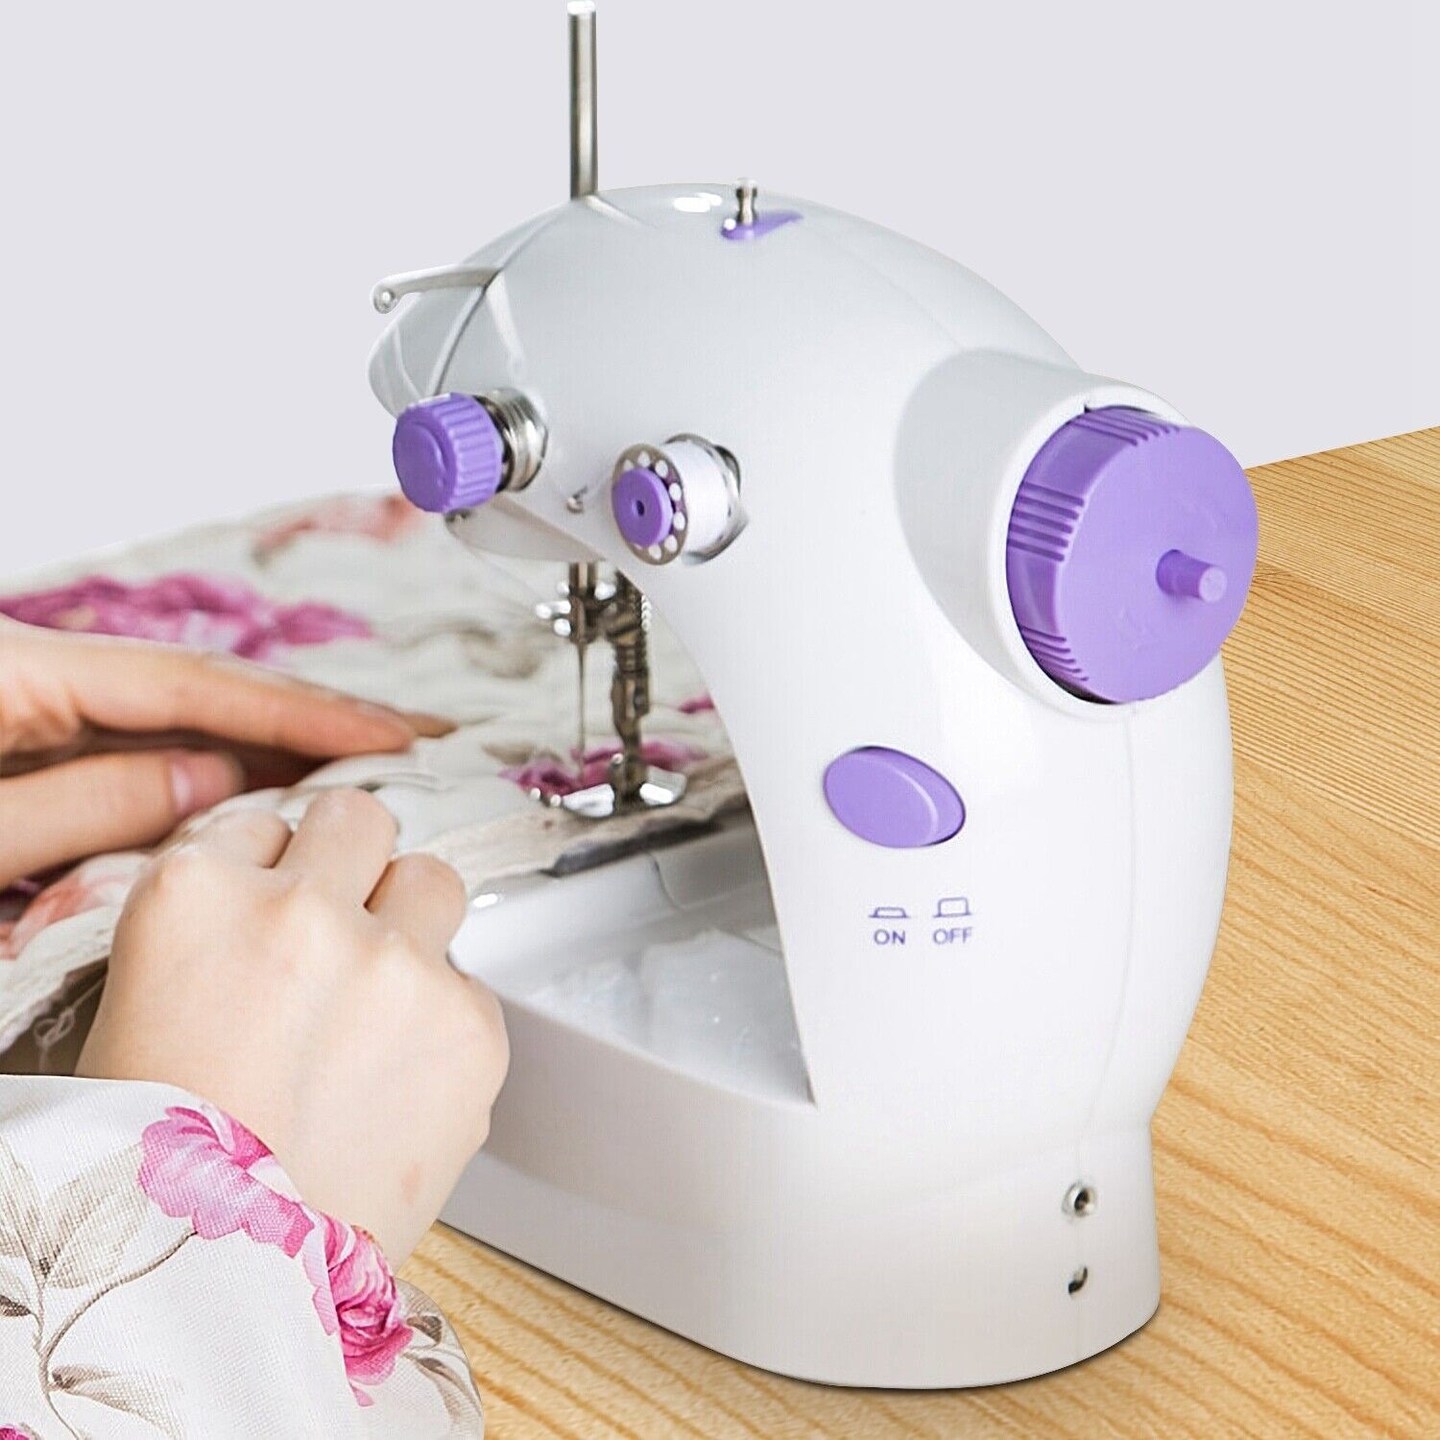 Portable Electric Sewing Machine with LED Light, and Foot Pedal for Home Crafting